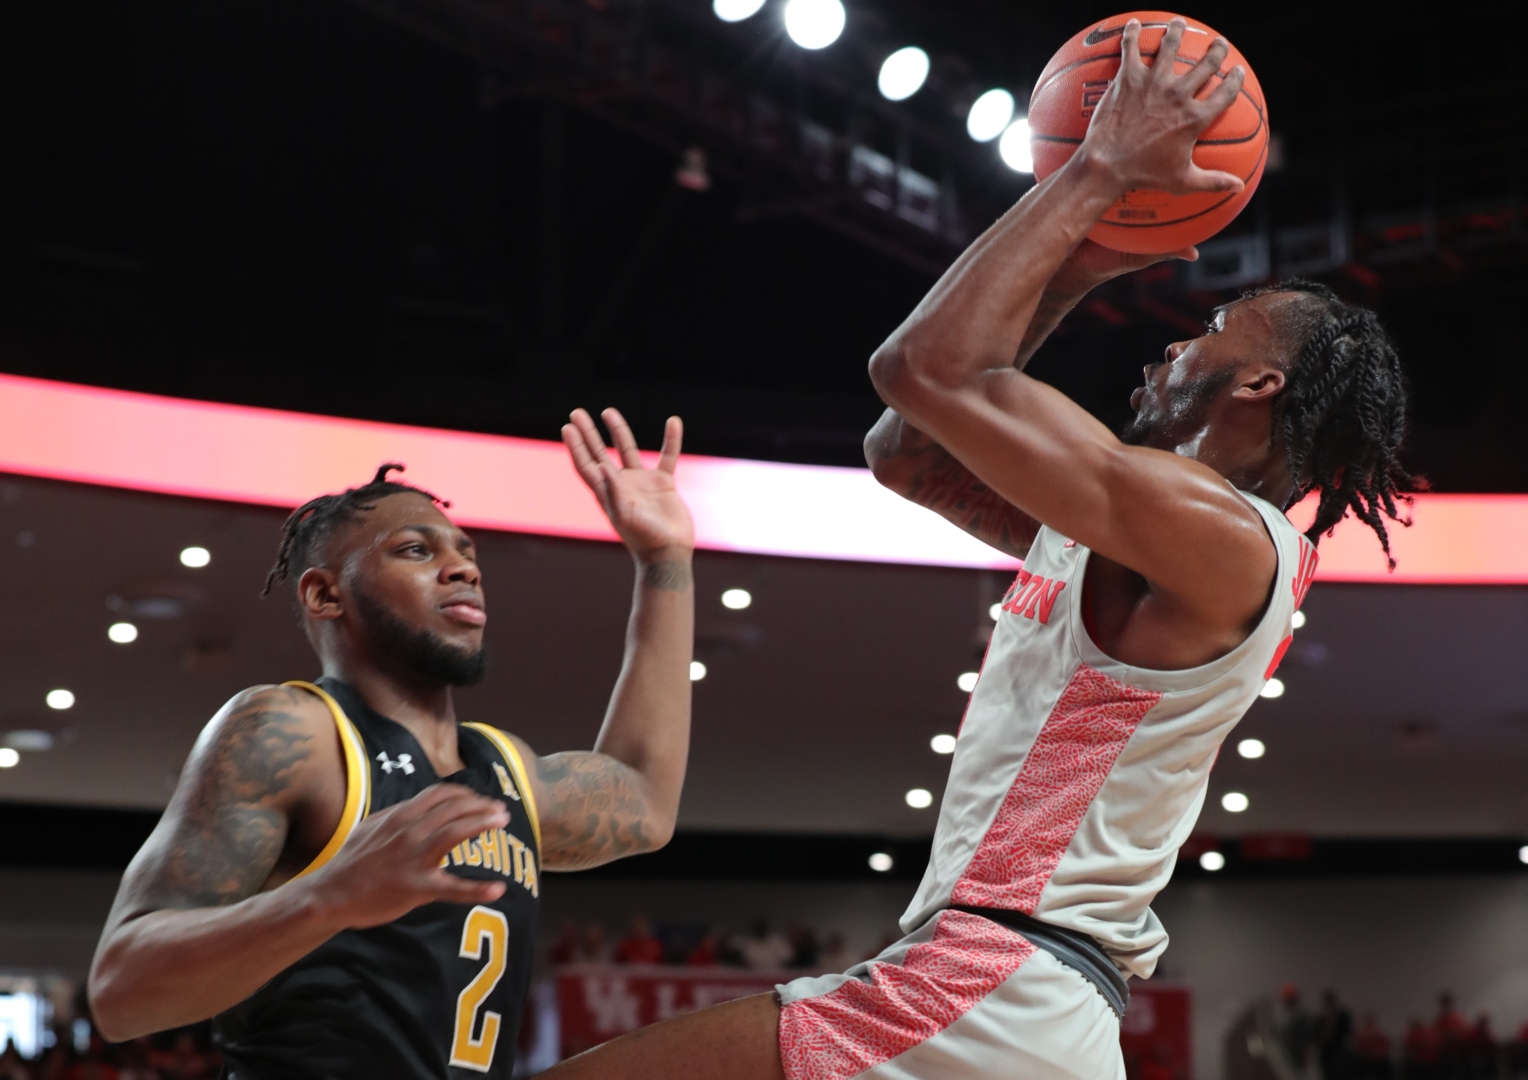 UH guard DeJon Jarreau challenges Wichita State guard Jamarius Burton during a 2019-20 season game at Fertitta Center. Kelvin Sampson and his Cougars suffered their first loss of 2020-21 against Tulsa on Tuesday. | Mikol Kindle Jr./The Cougar